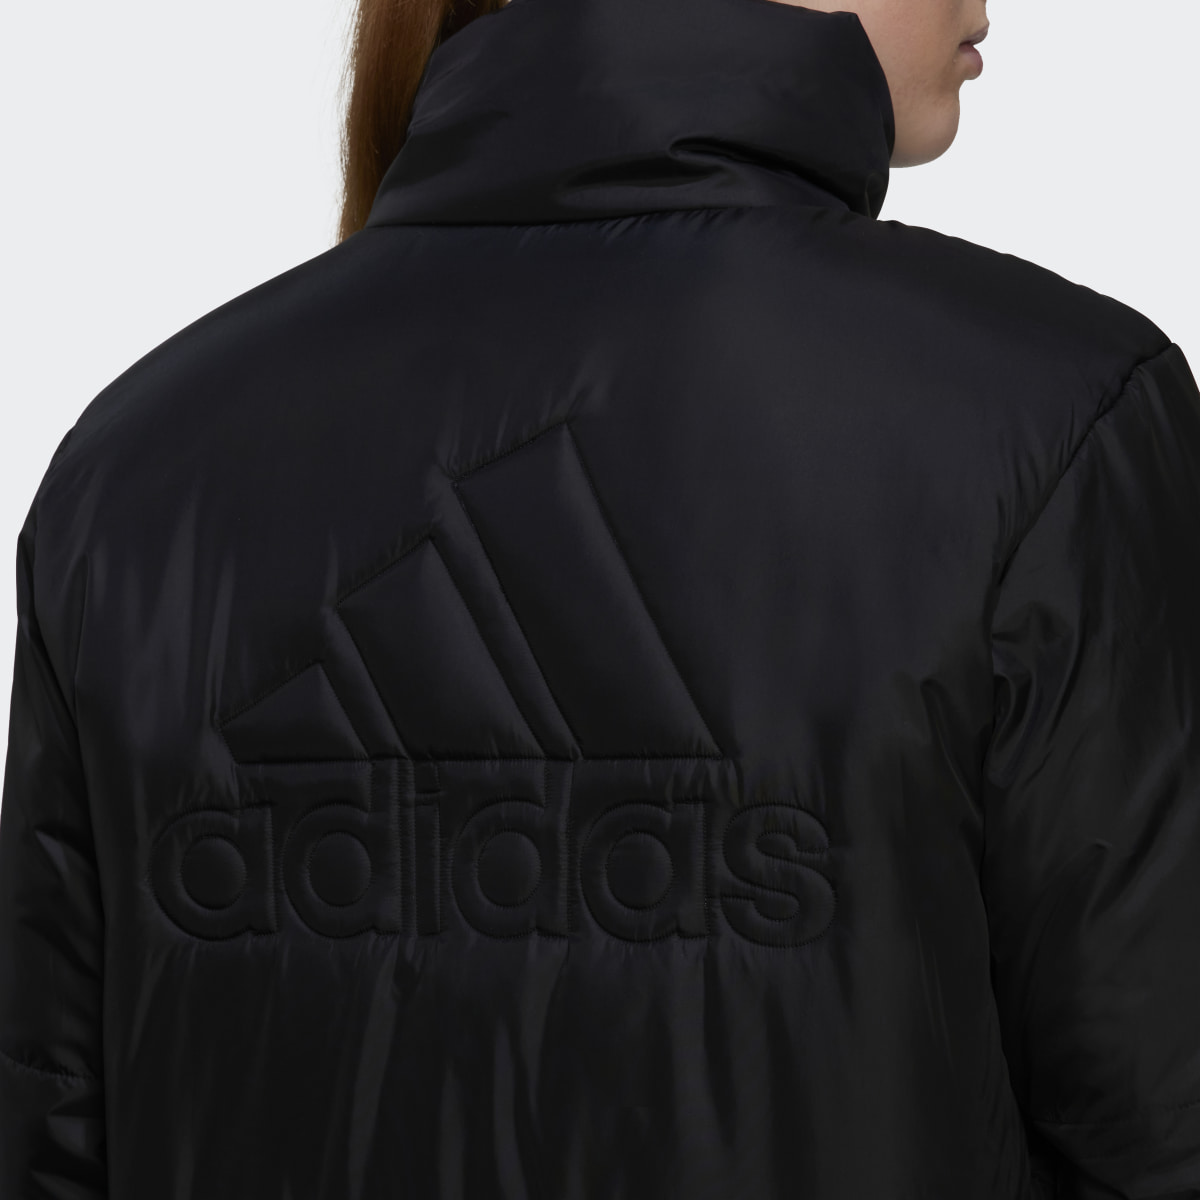 Adidas BSC Insulated Jacket. 9